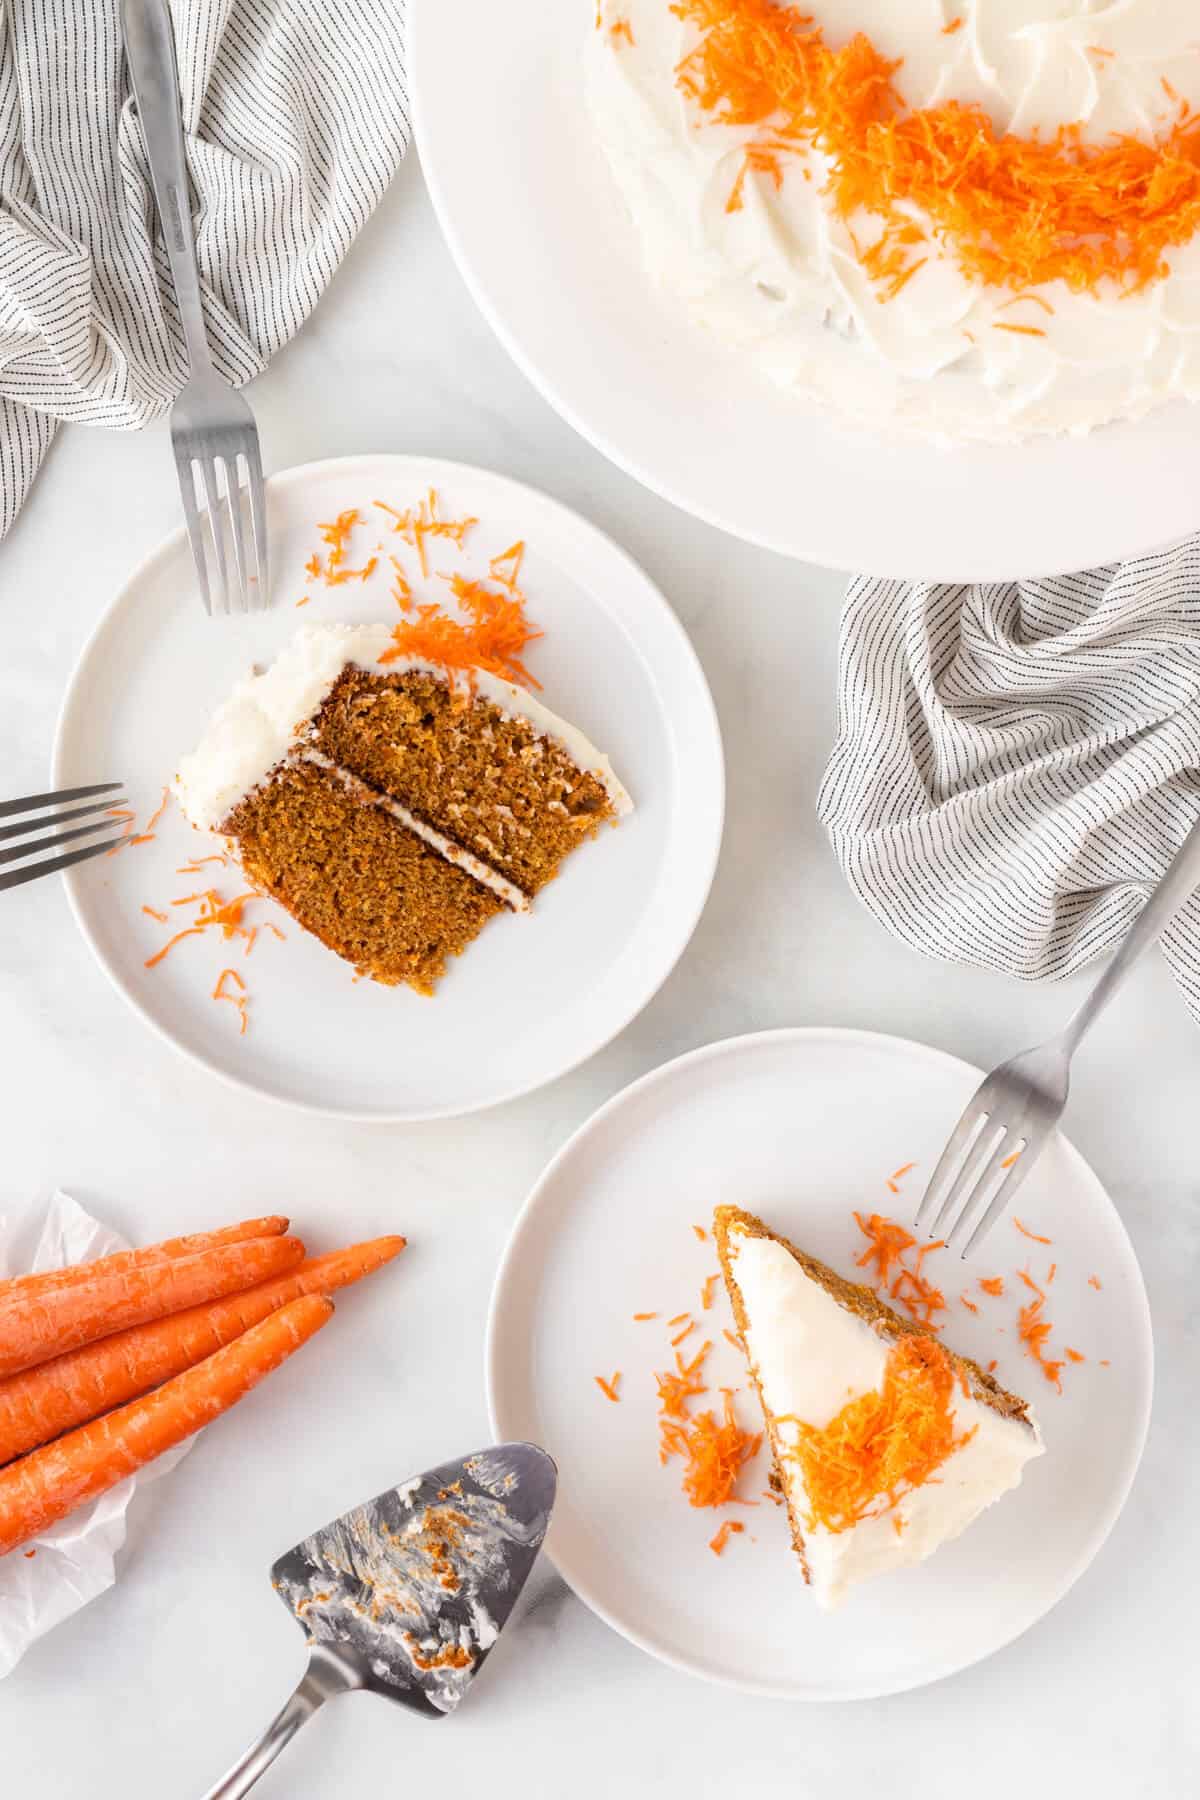 Two slices of carrot cake on plates.